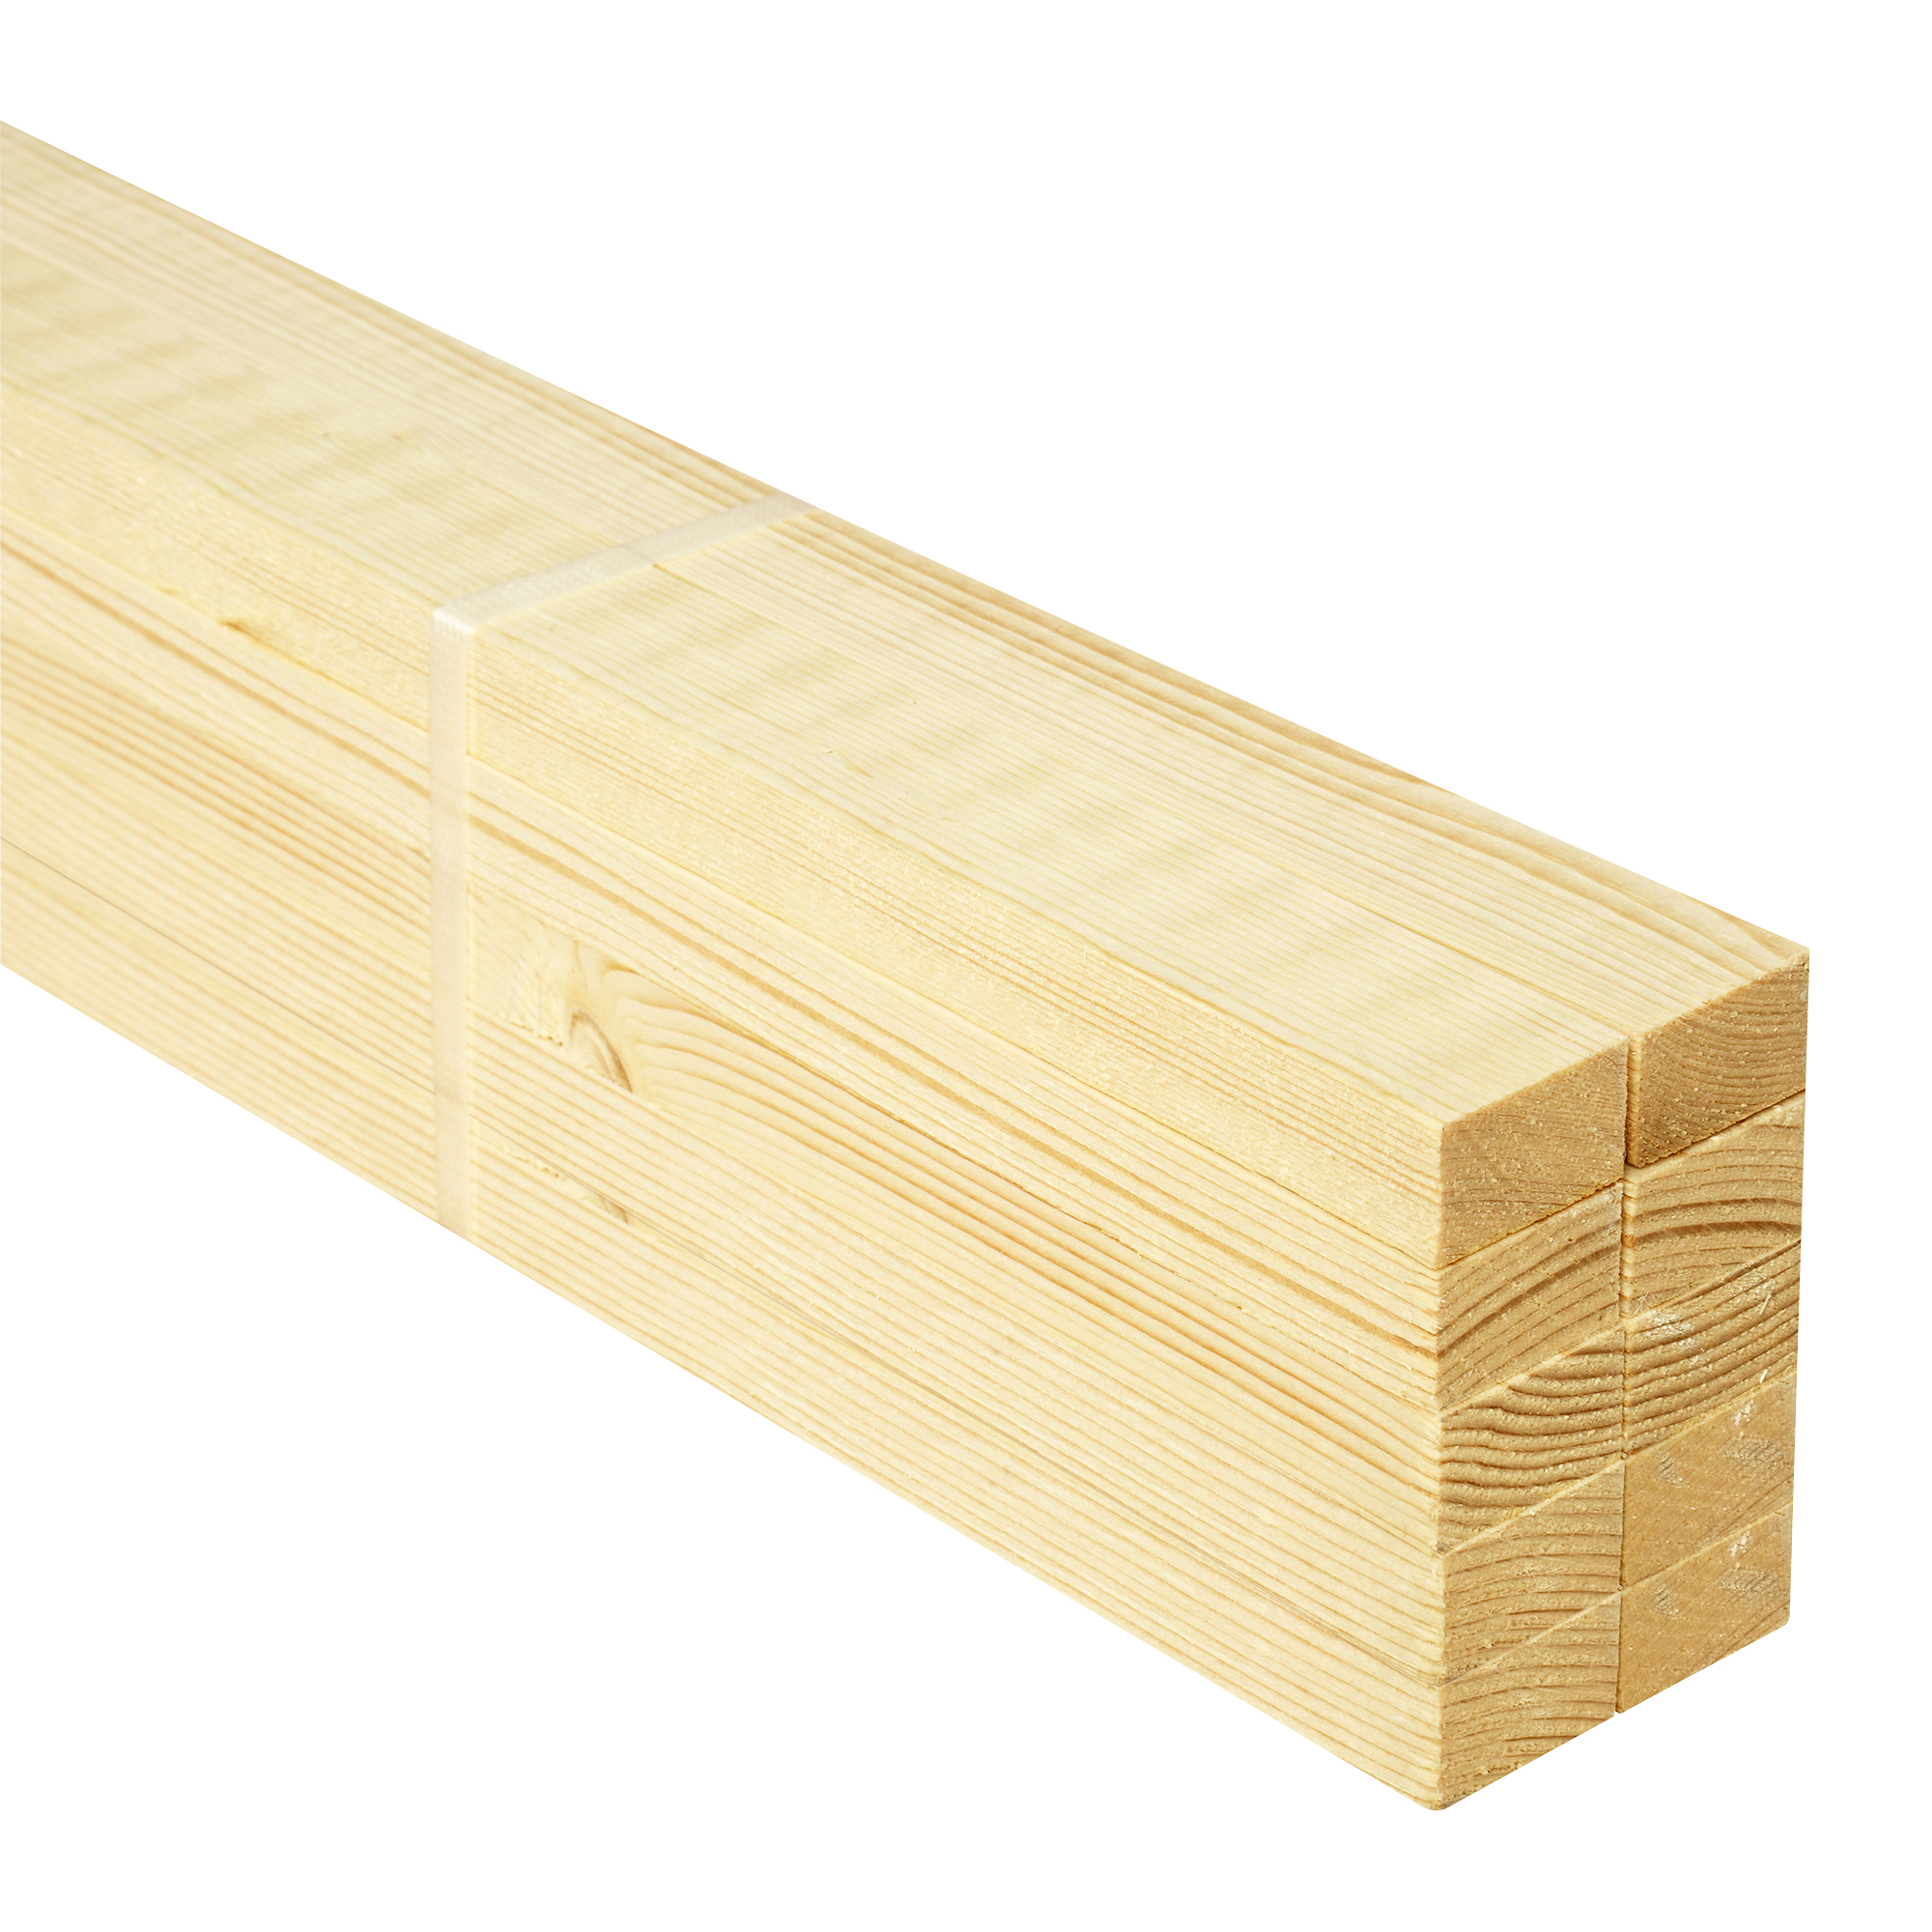 Image of Wickes Sawn Kiln Dried Timber - 19 x 38 x 1800mm - Pack of 10